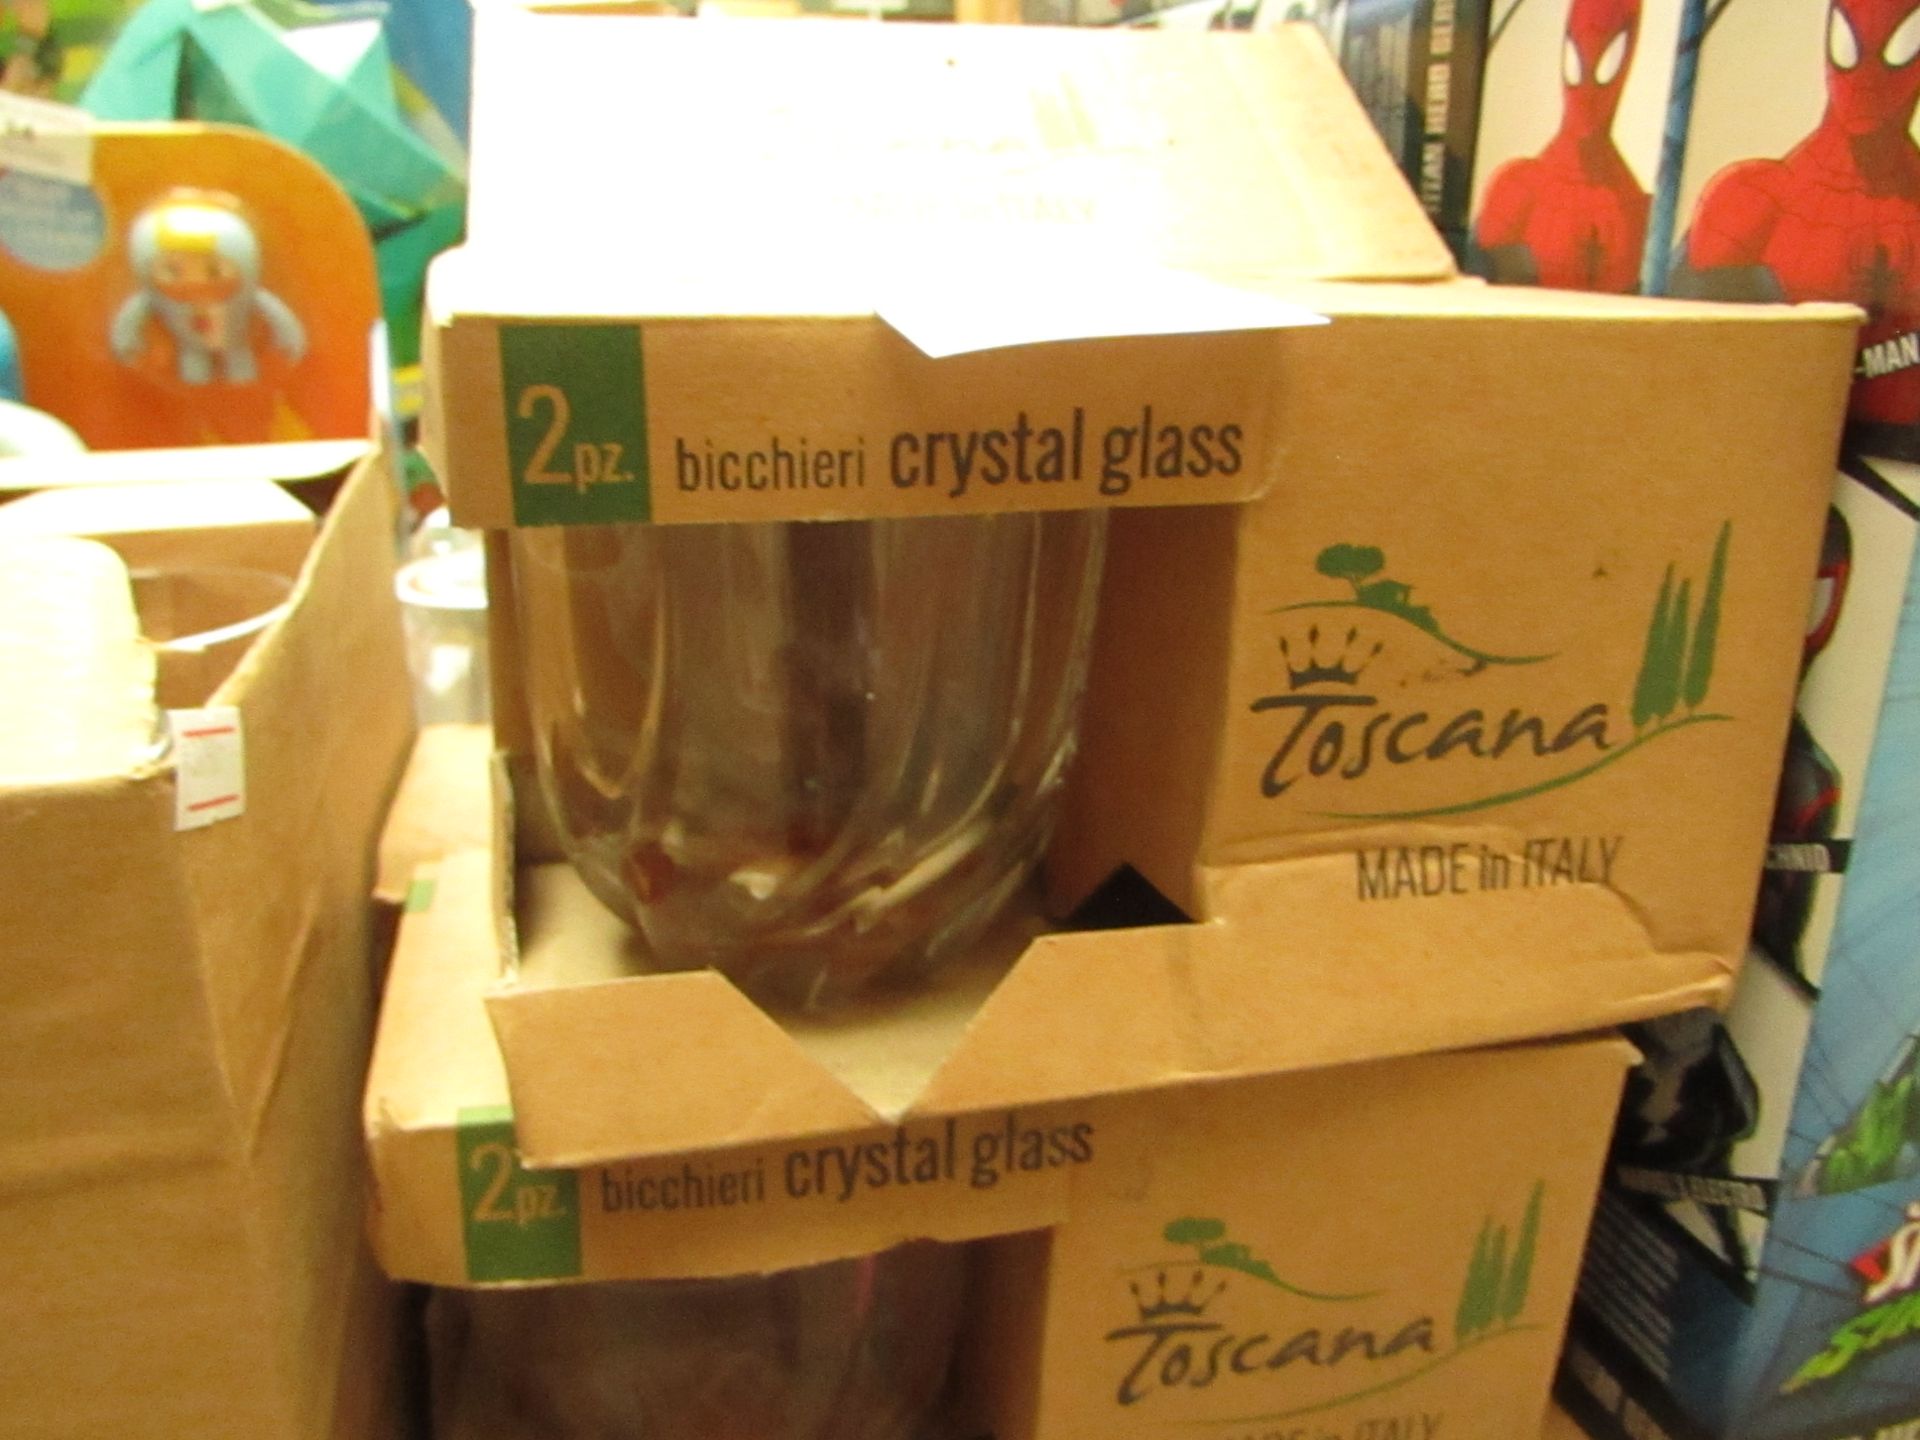 4x Toscana Bicchieri Crystal Glasses - Boxed.